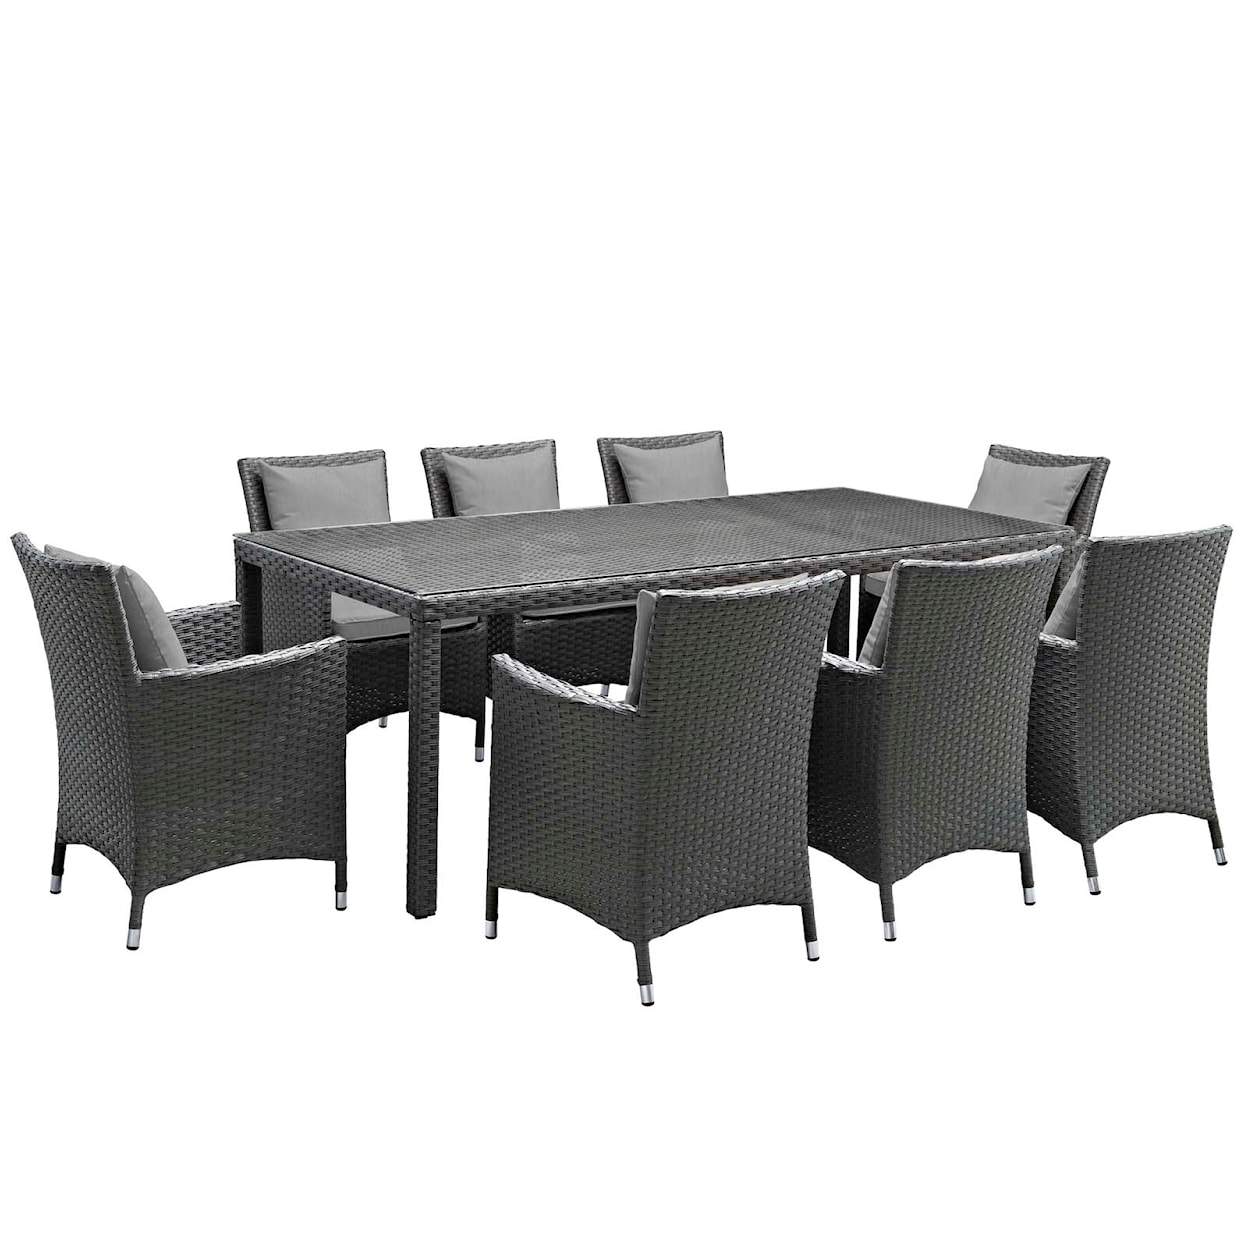 Modway Sojourn Outdoor 9 Piece Dining Set